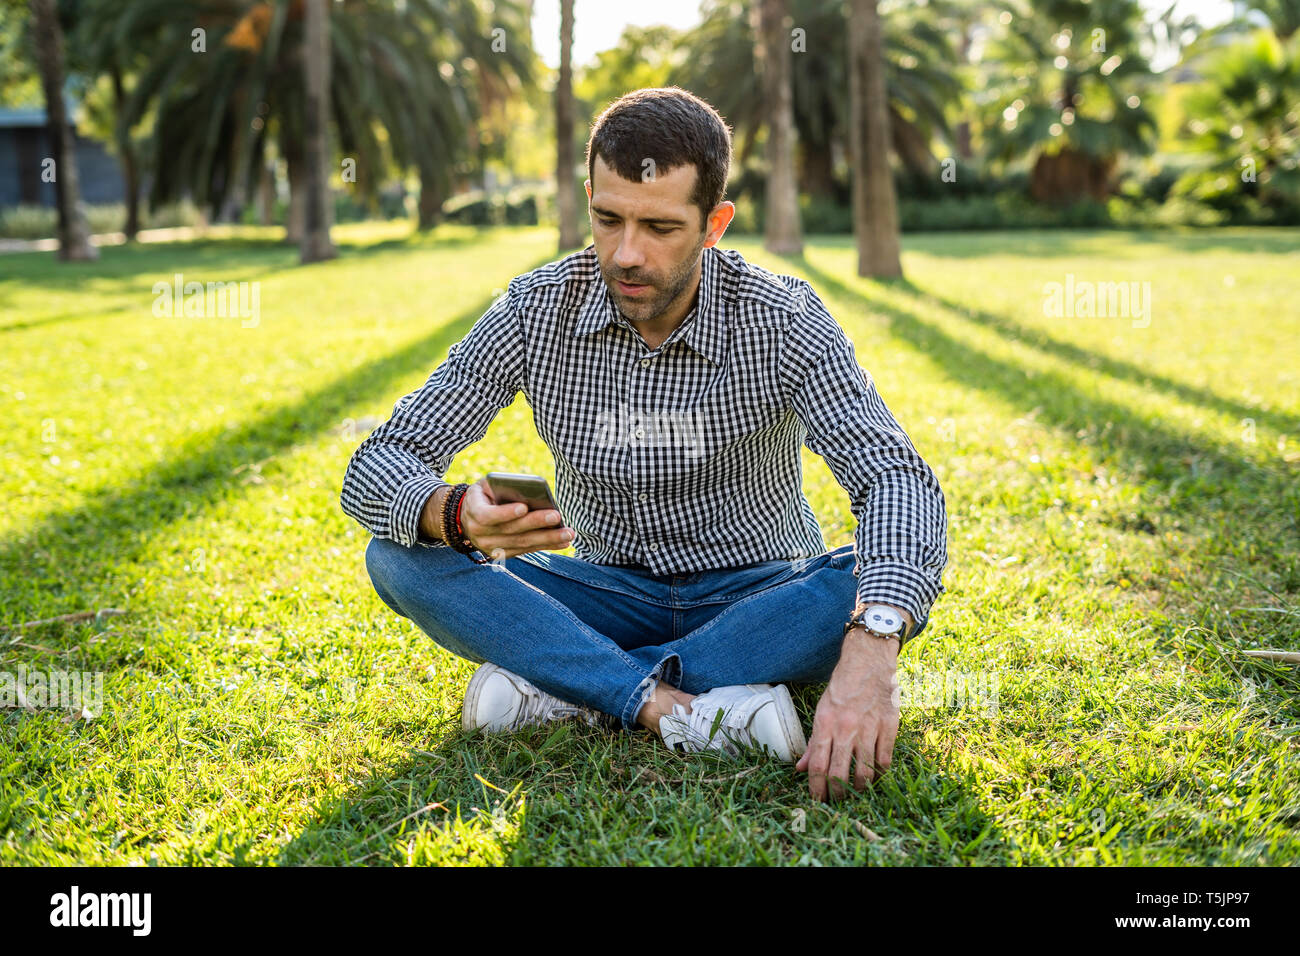 Man sitting on meadow in city park looking at cell phone Stock Photo